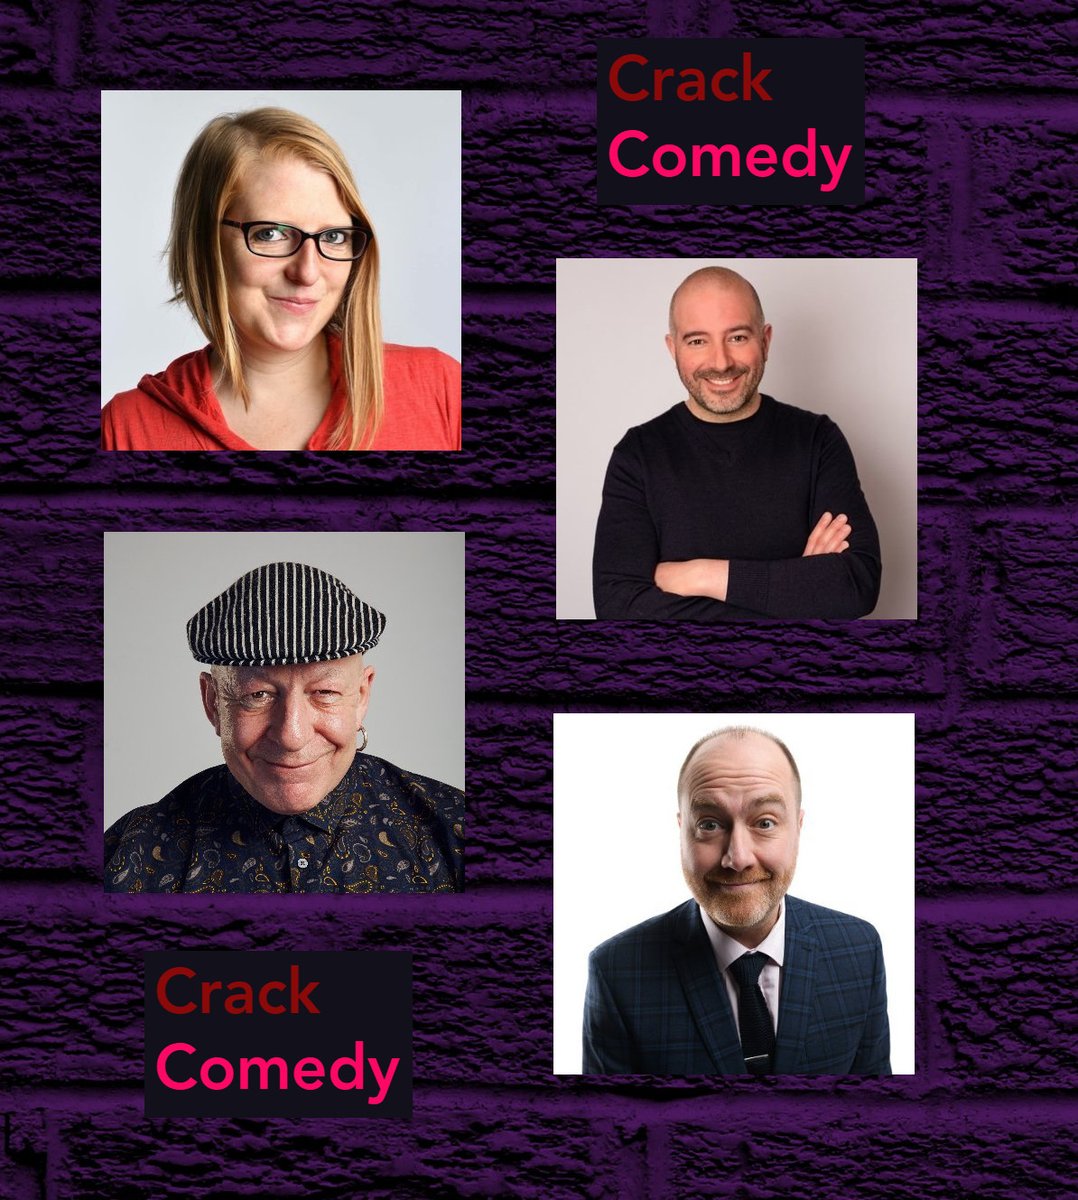 This Saturday I’ll be doing the old #StandUpComedy in #Wimbledon (@CrackComedy in @Tunnel267) with these excellent joke fountains - @robynHperkins, @stefanompaolini & @InnocentJeff 🎫crackcomedy.com/comedy-wimbled…